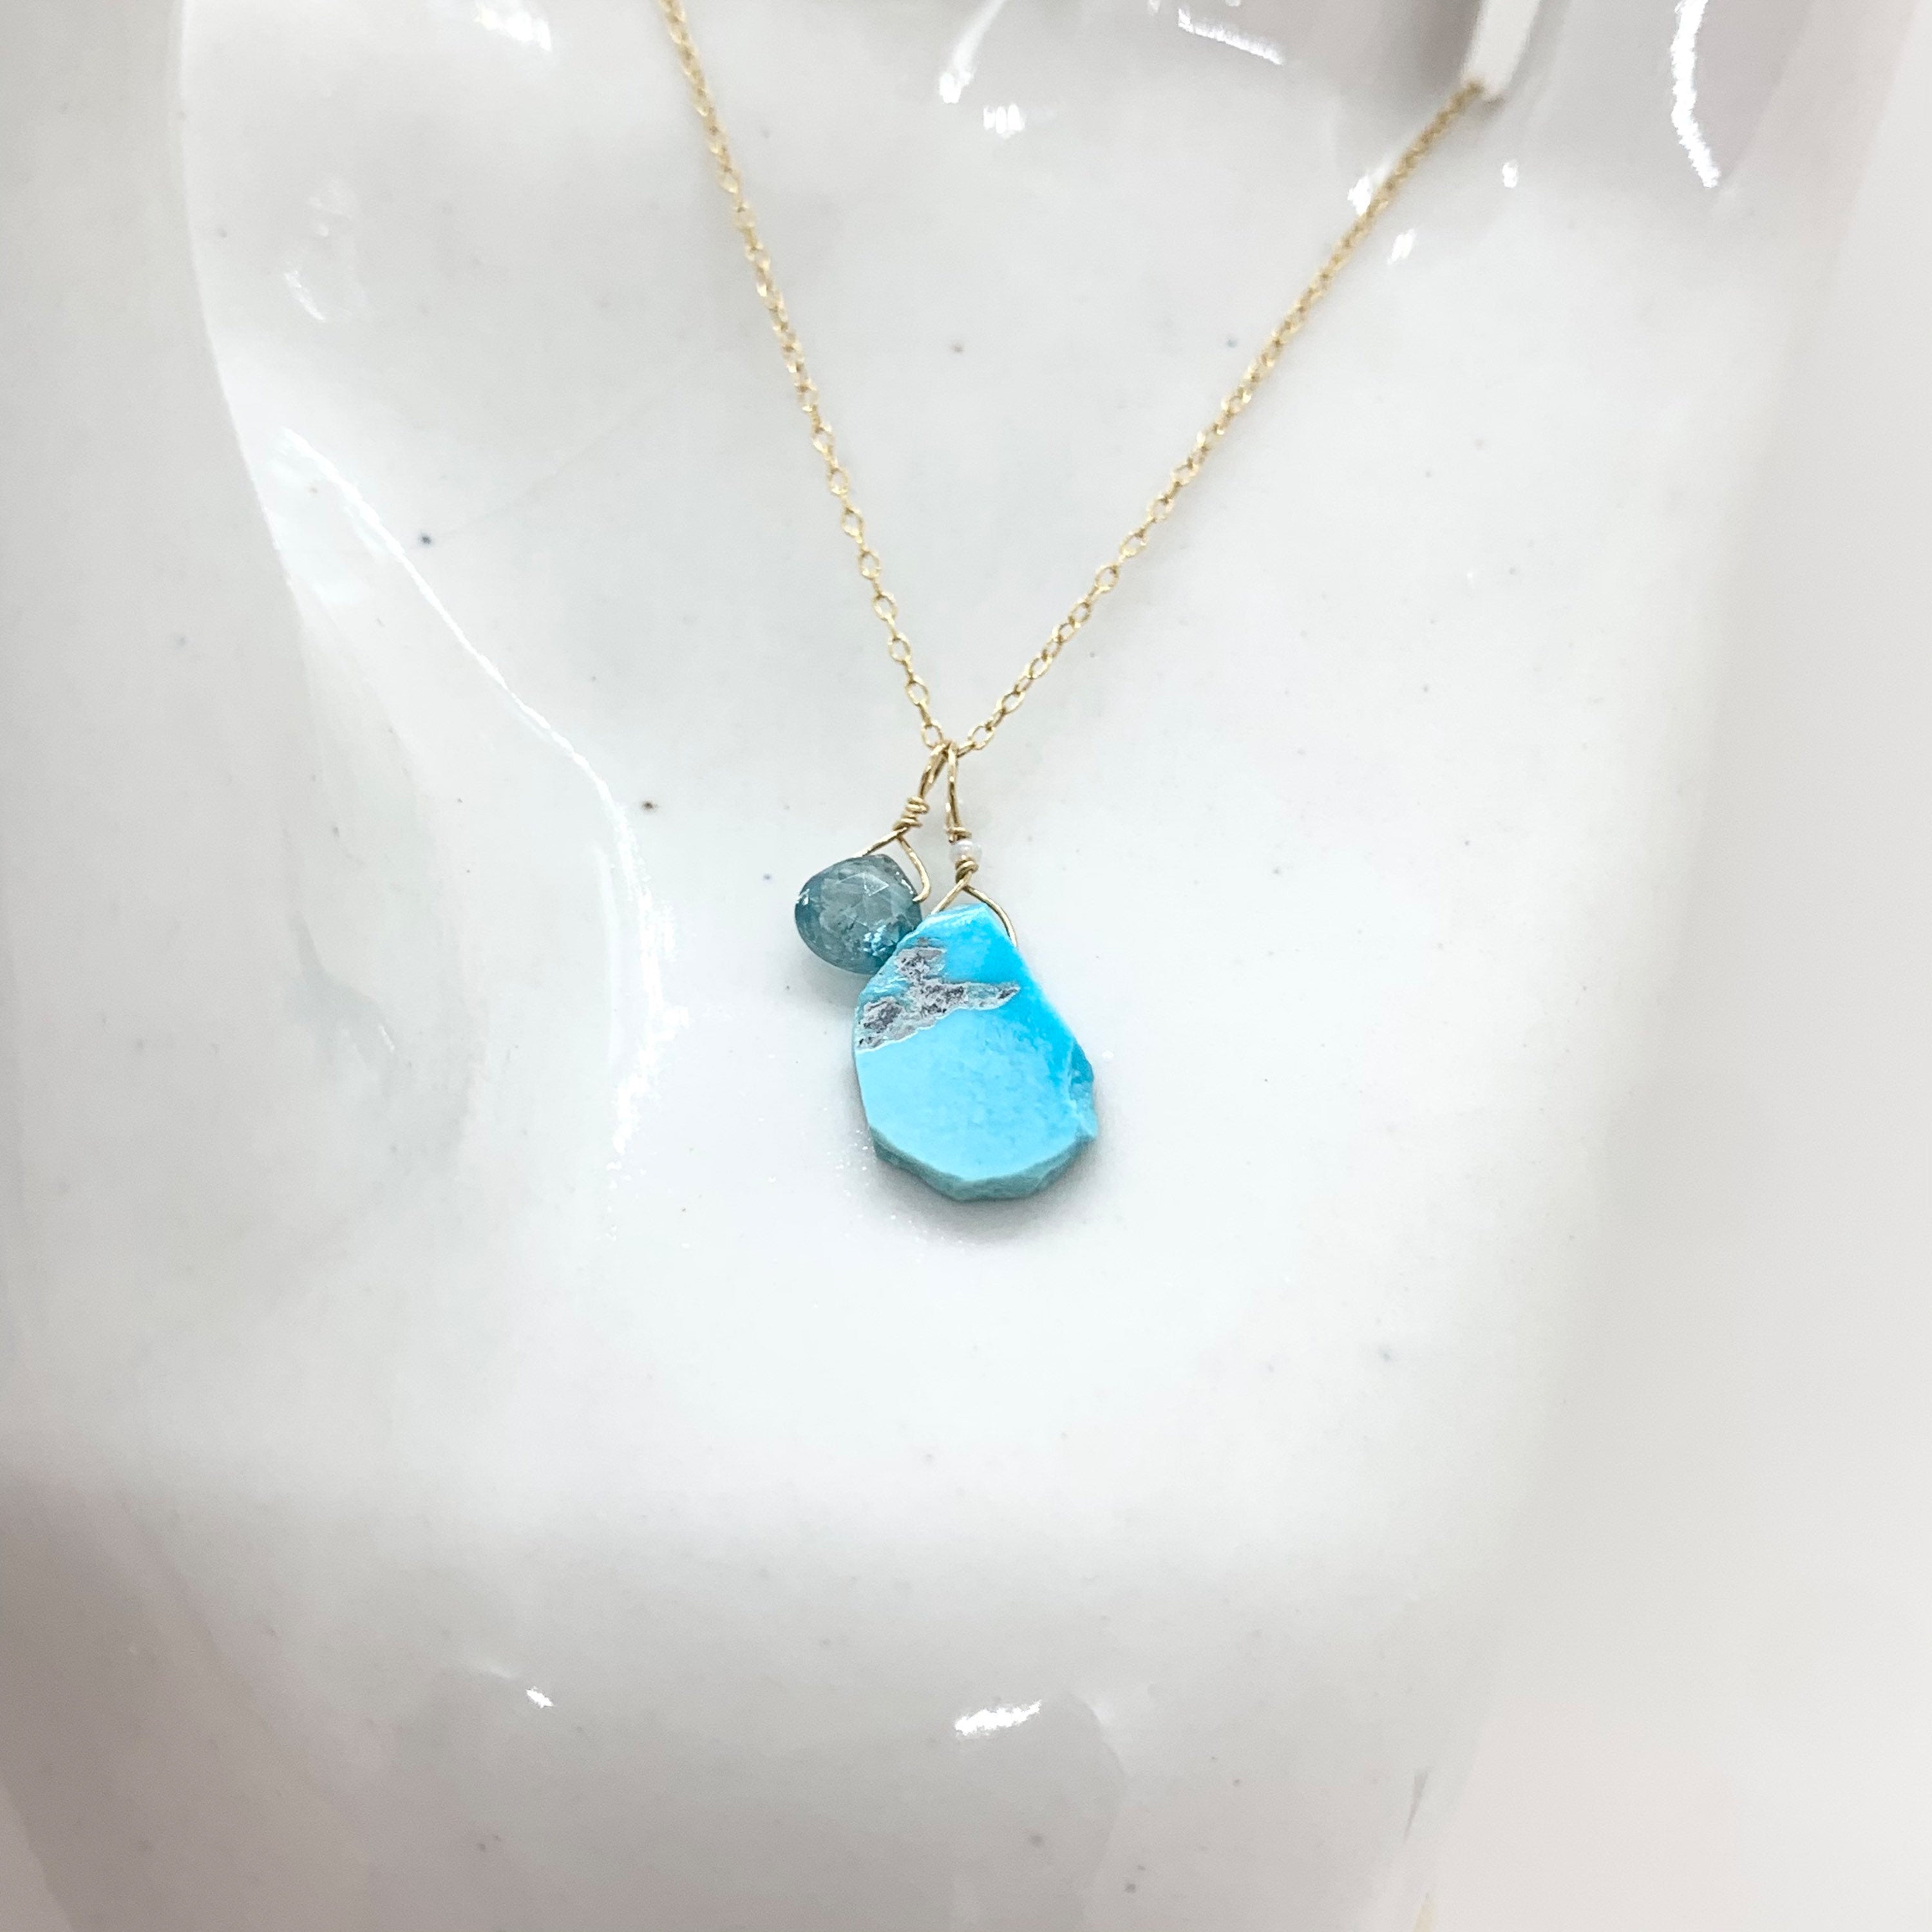 14k Gold Chain Necklace w/ Turquoise, Blue London Topaz & Antique Italian Bead